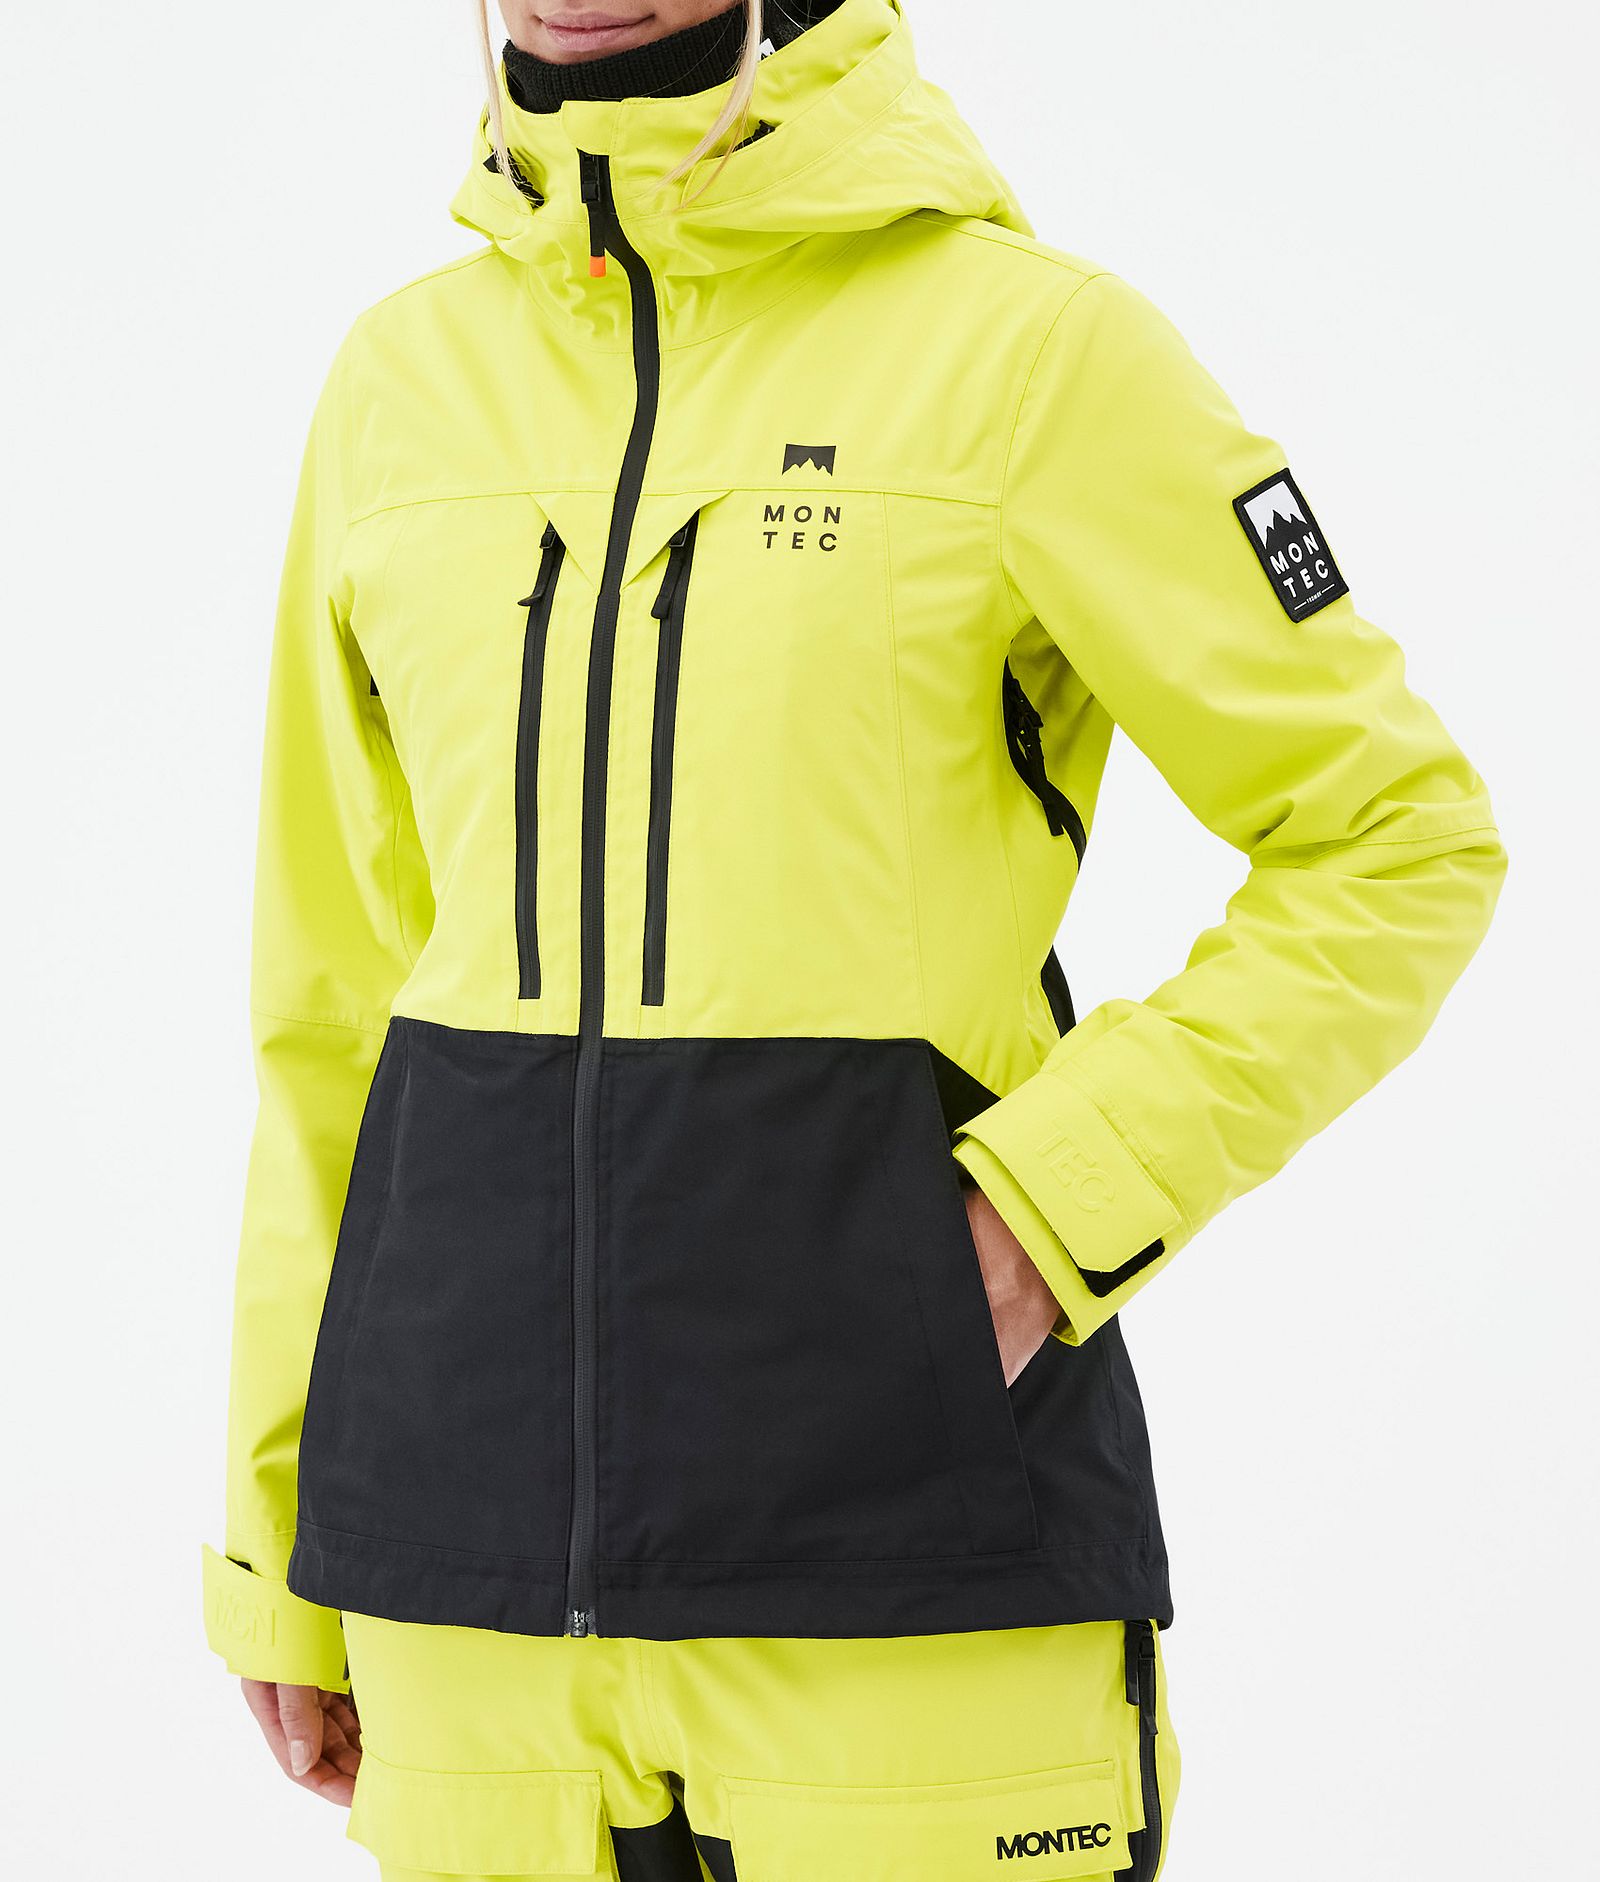 Montec Moss W Giacca Sci Donna Bright Yellow/Black